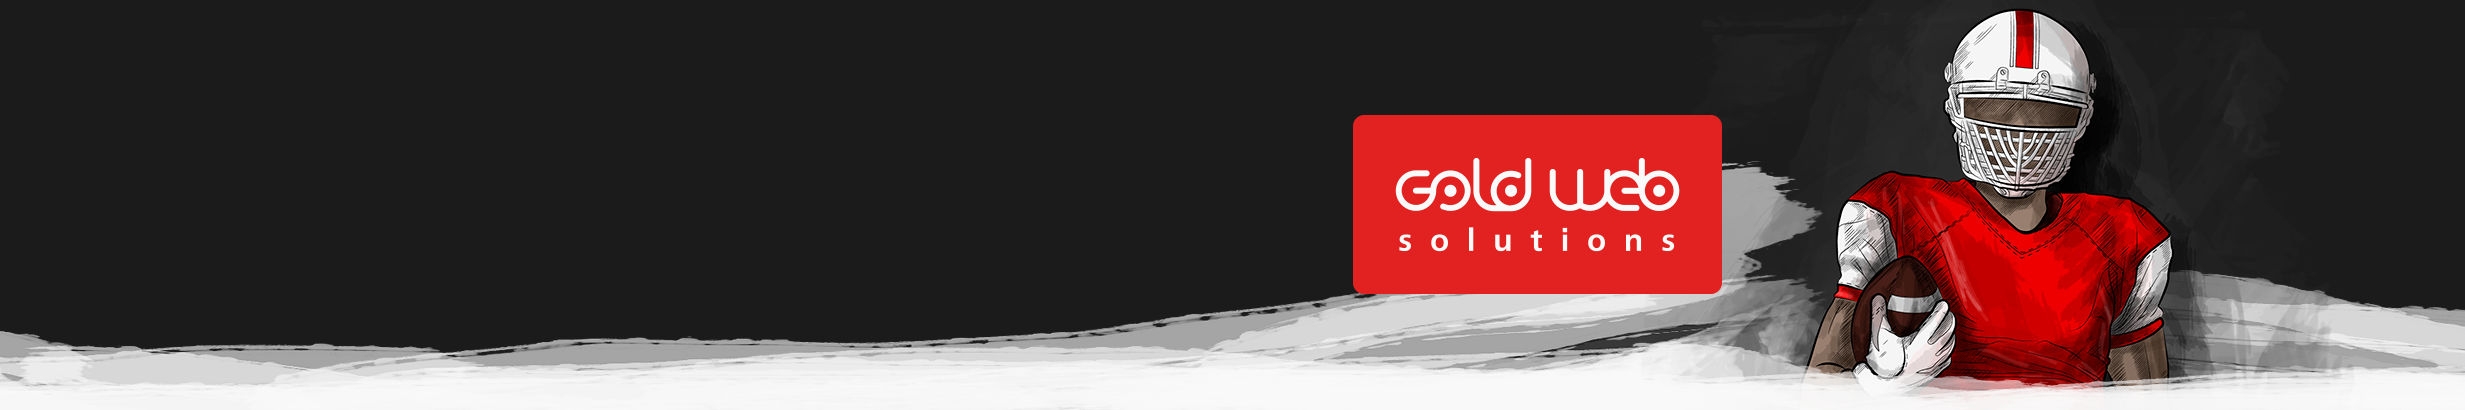 Goldweb Solutions's profile banner